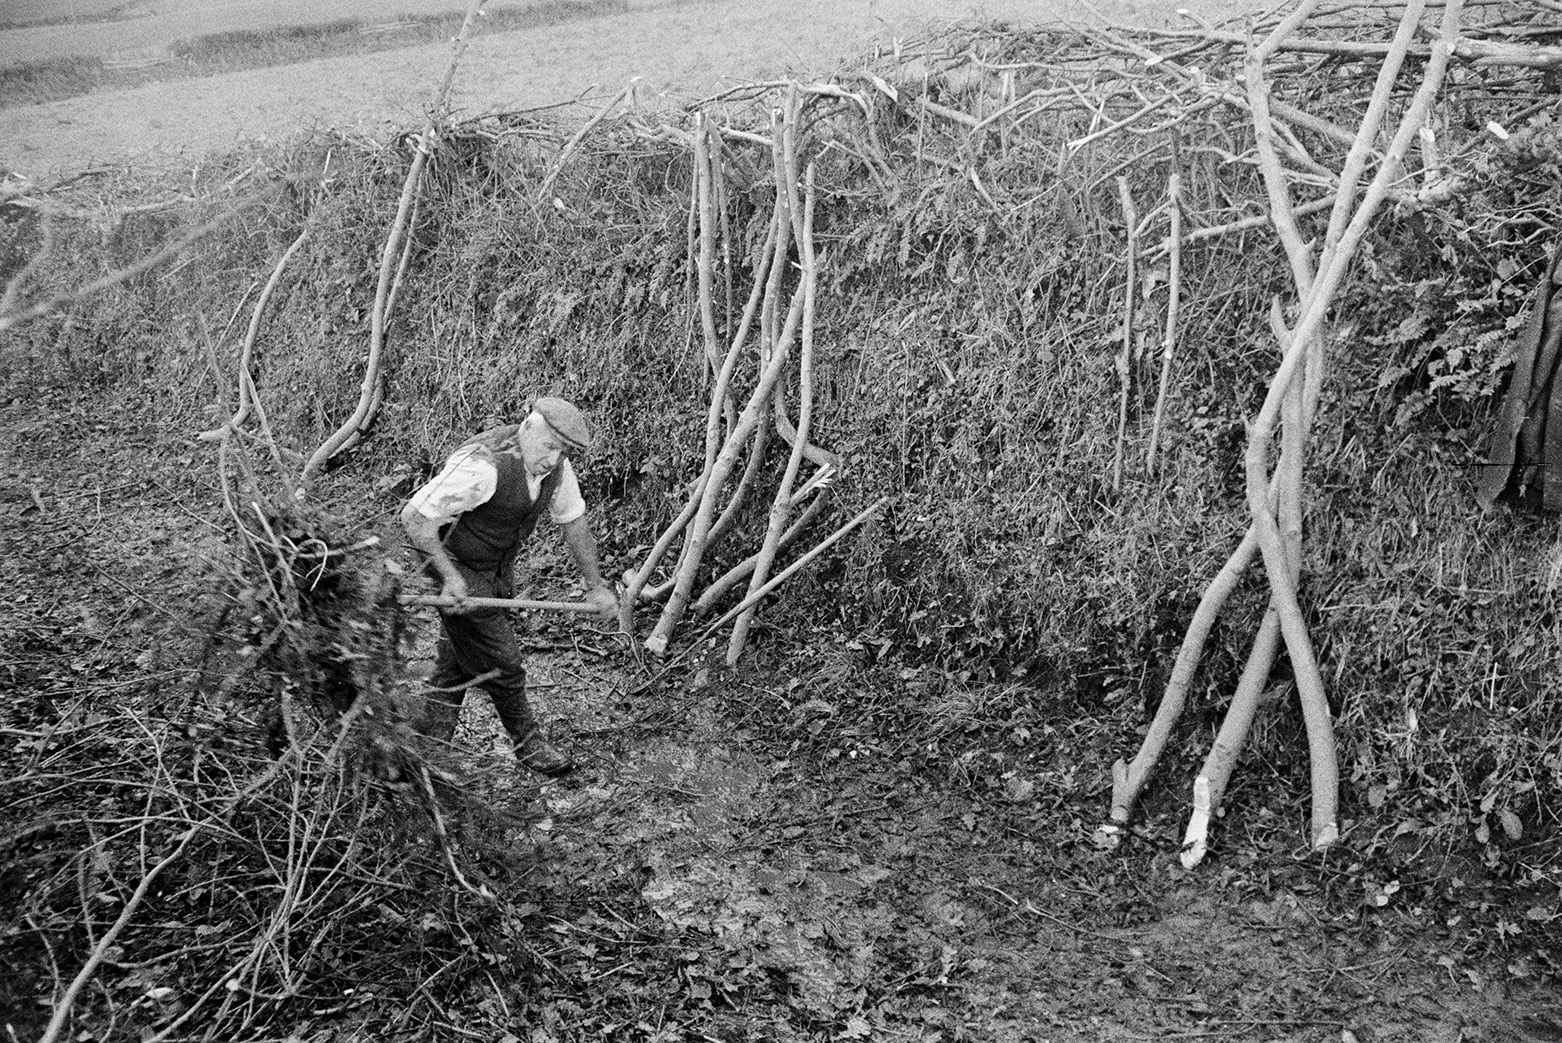 Tom Hooper trimming a hedge by hand in Green Lane, Beaford. He is carrying an axe and walking past branches propped against a laid hedge on the other side of the lane.